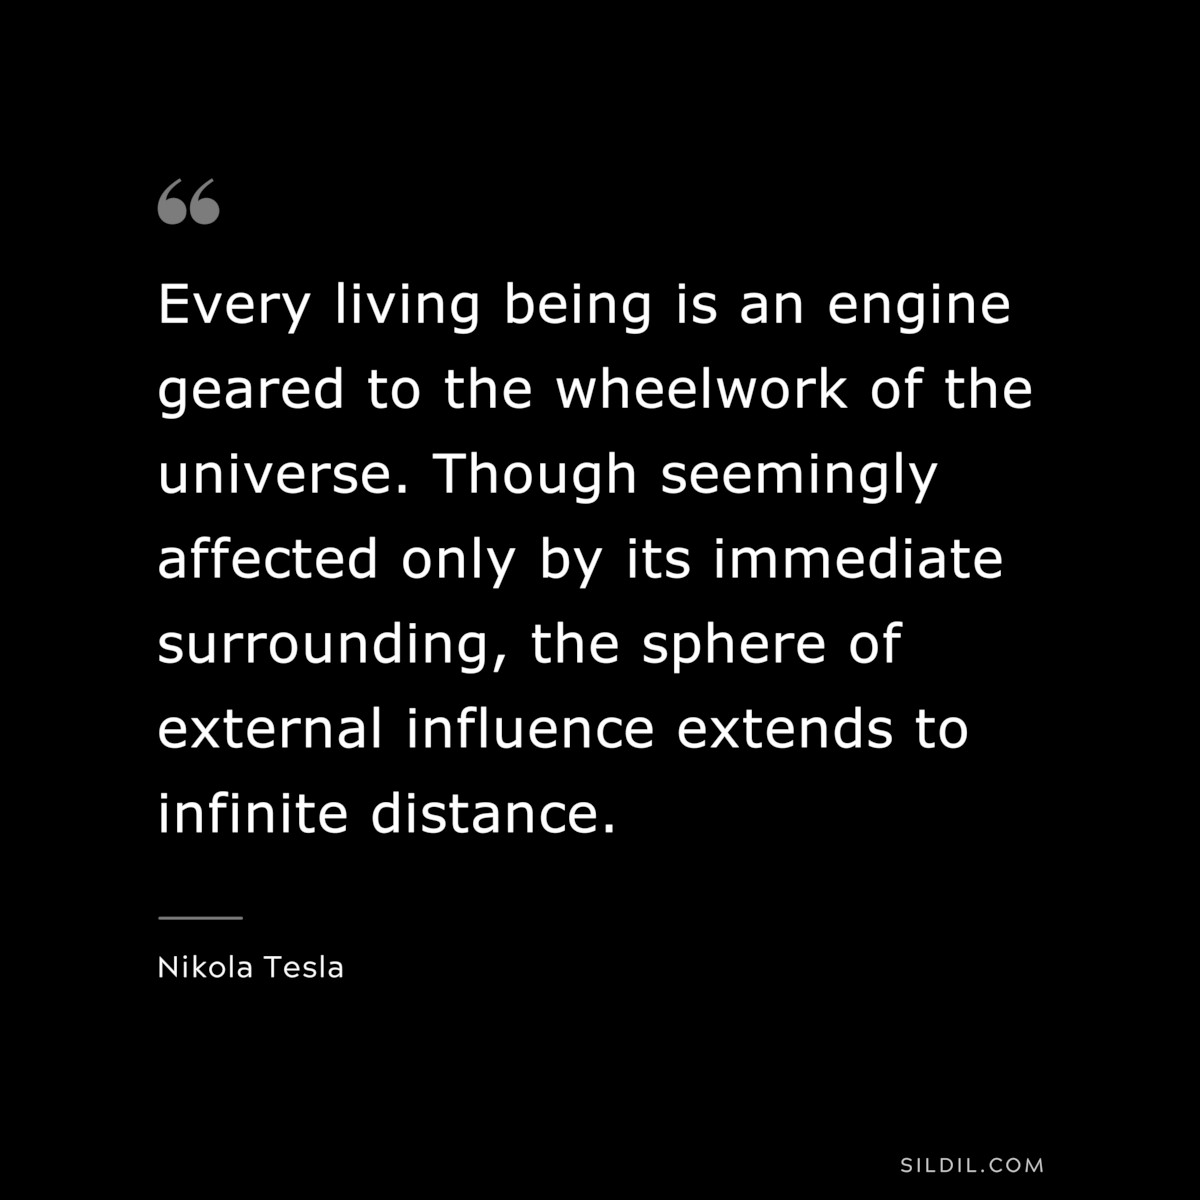 Every living being is an engine geared to the wheelwork of the universe. Though seemingly affected only by its immediate surrounding, the sphere of external influence extends to infinite distance. ― Nikola Tesla